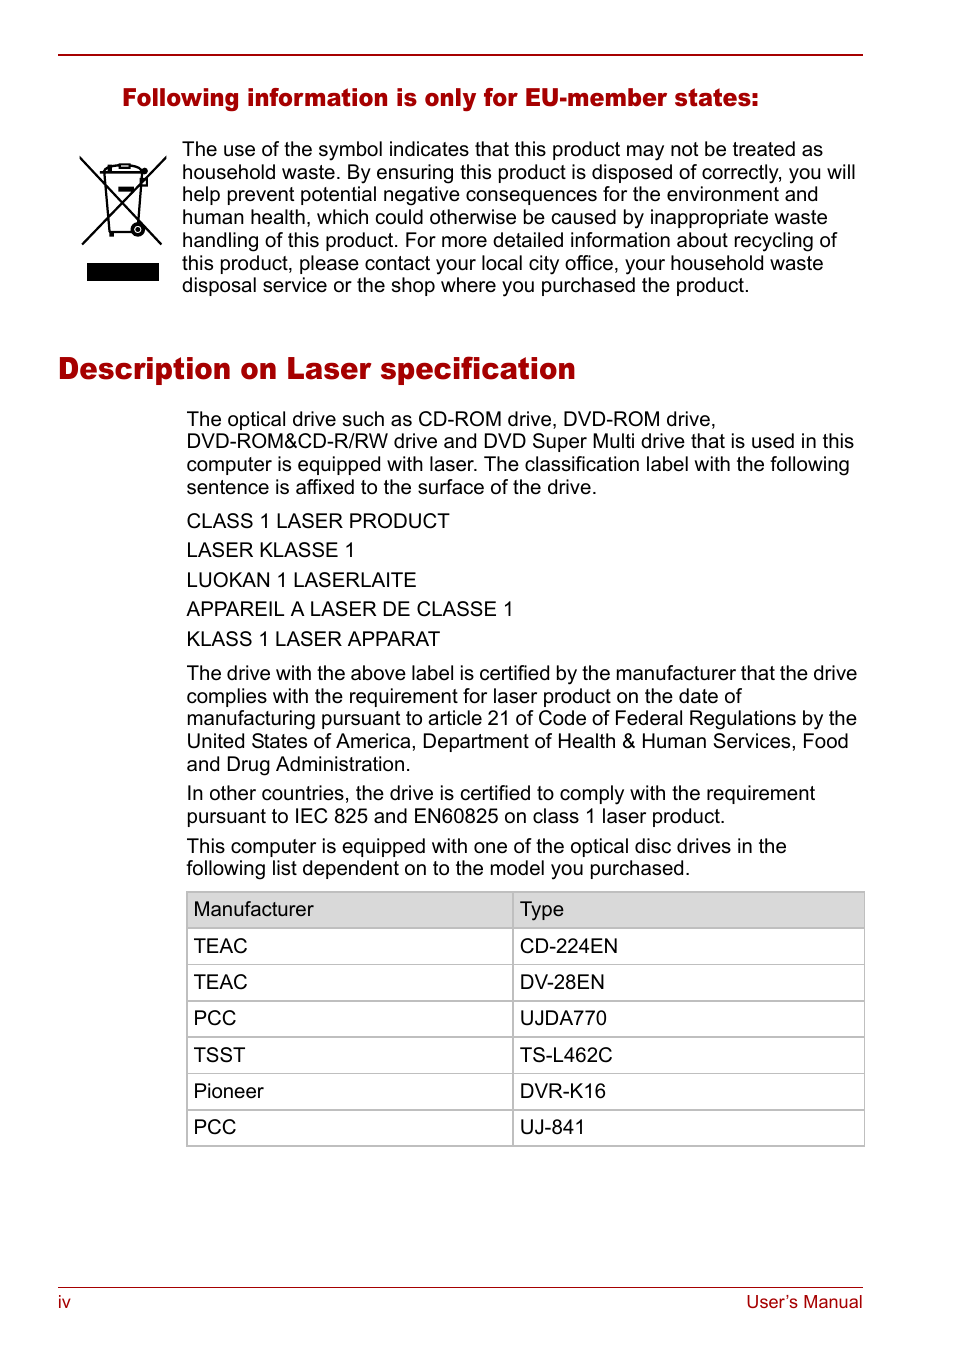 Description on laser specification, Following information is only for eu-member states | Toshiba M5 User Manual | Page 4 / 240